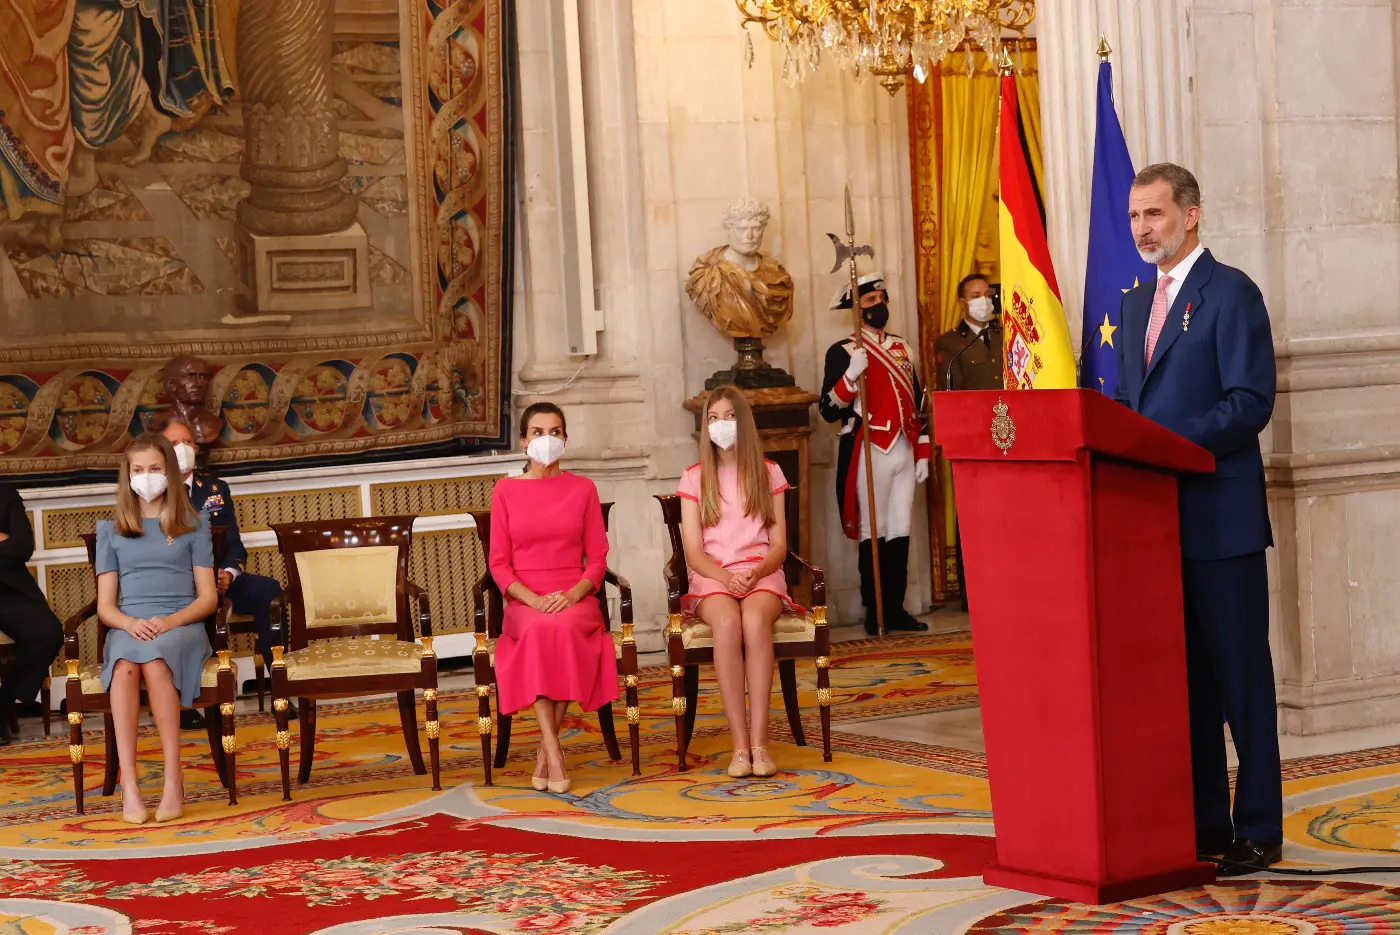 Felipe and Letizia became the King and Queen of Spain in 2014